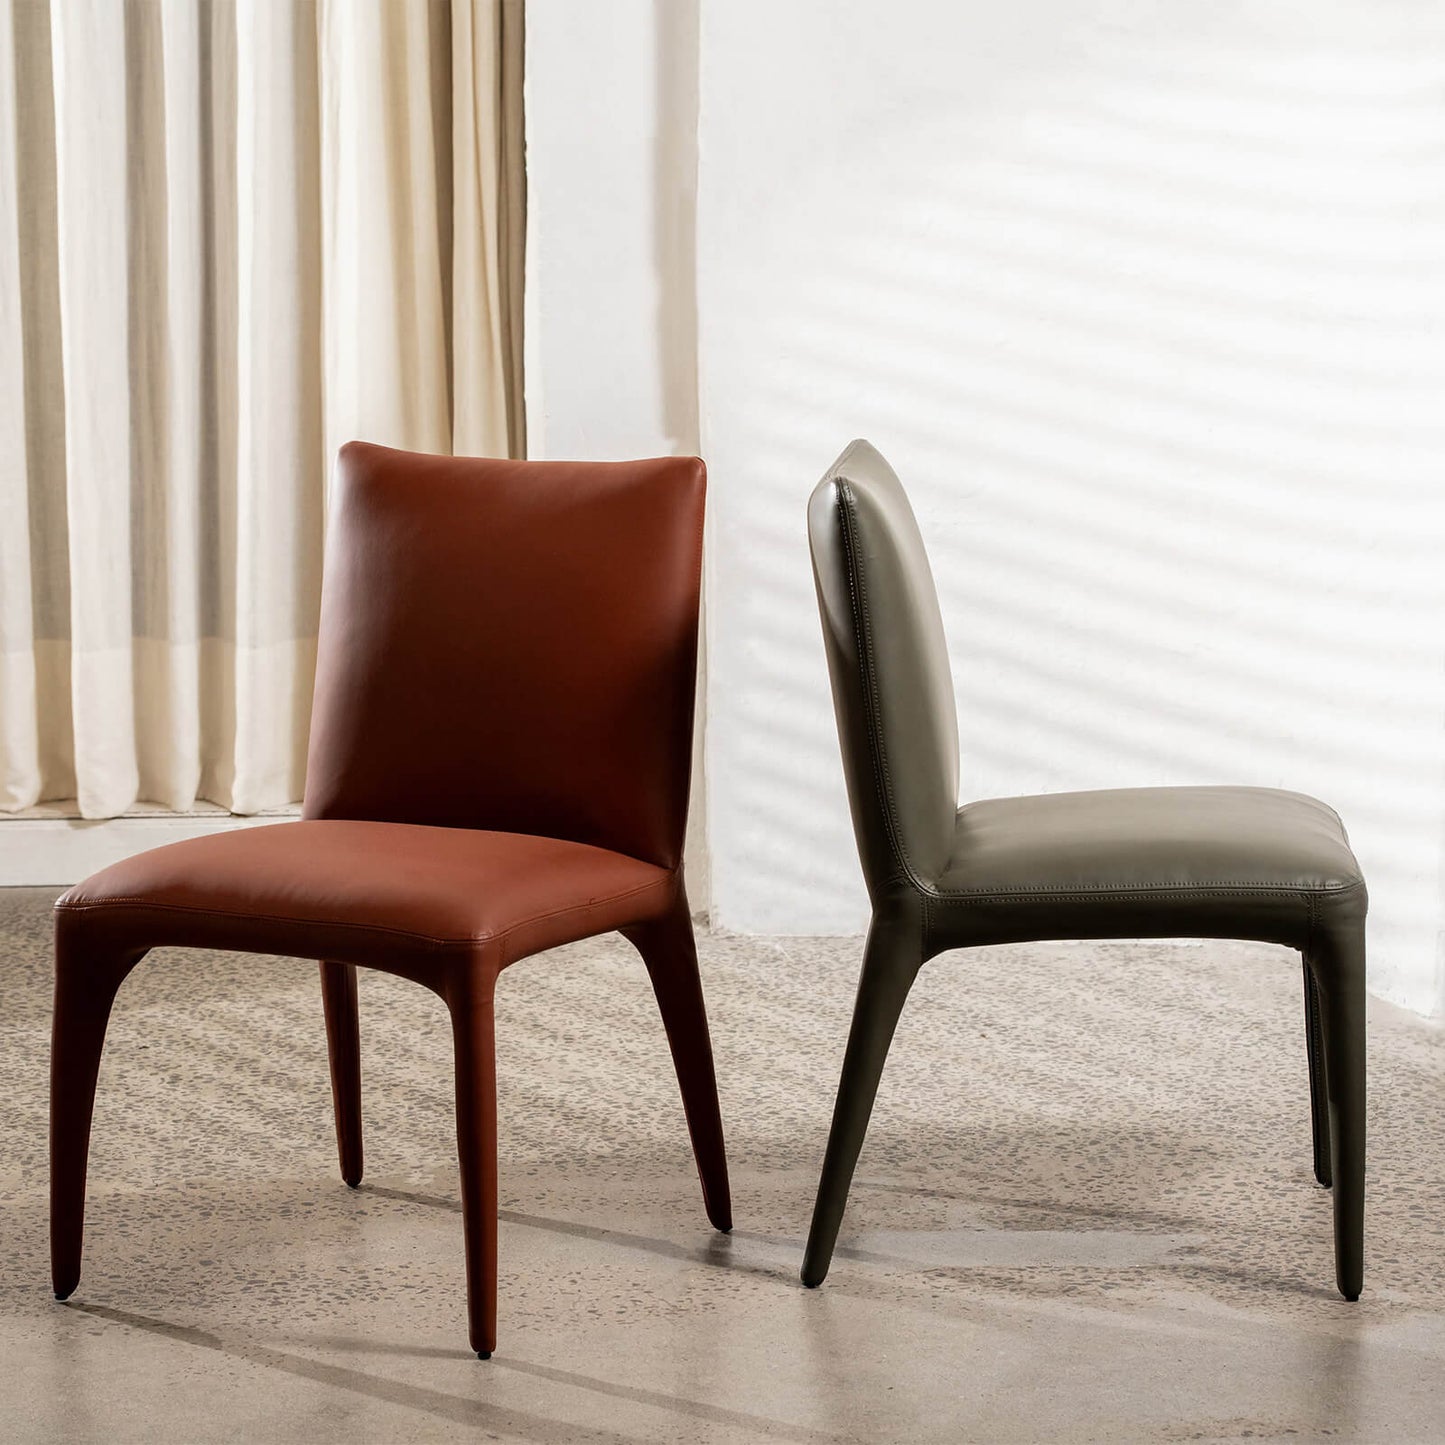 Bravo | Modern Olive PU Leather Dining Chairs | Set Of 2 | Tan